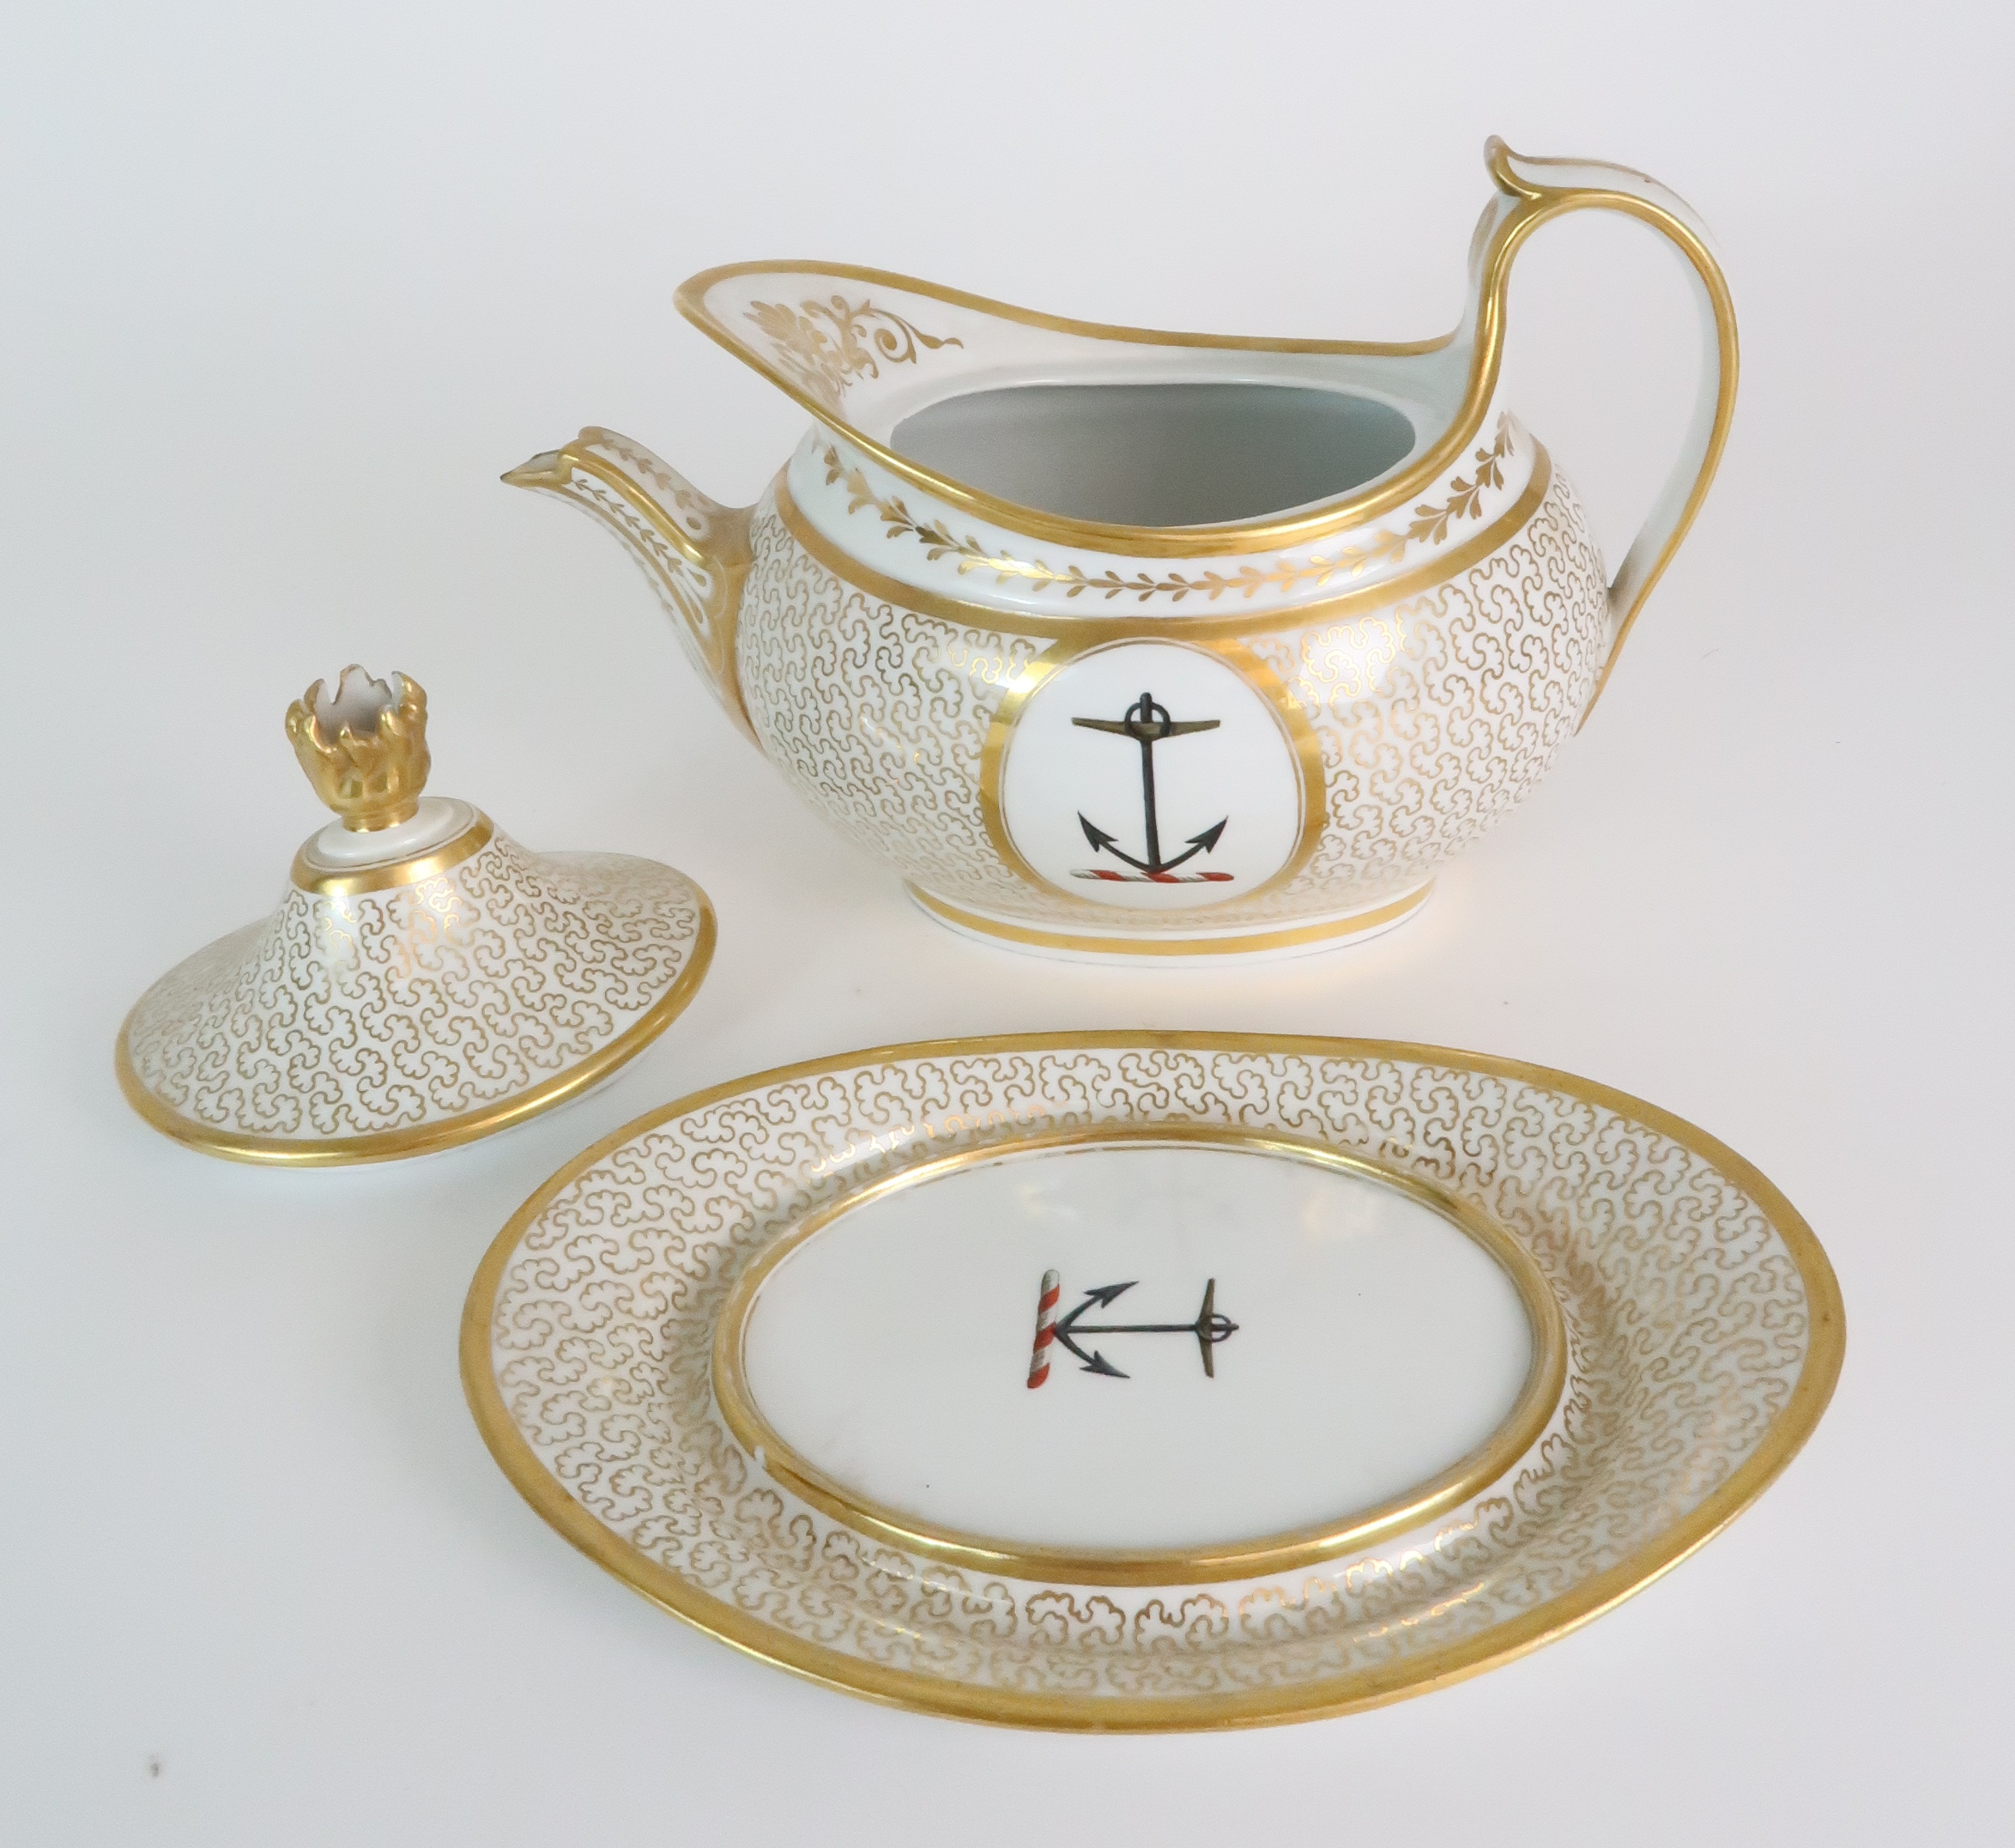 AN EARLY 19TH CENTURY BARR FLIGHT & BARR OVAL TEAPOT, COVER AND MATCHING STAND the cover with gilt - Image 5 of 8